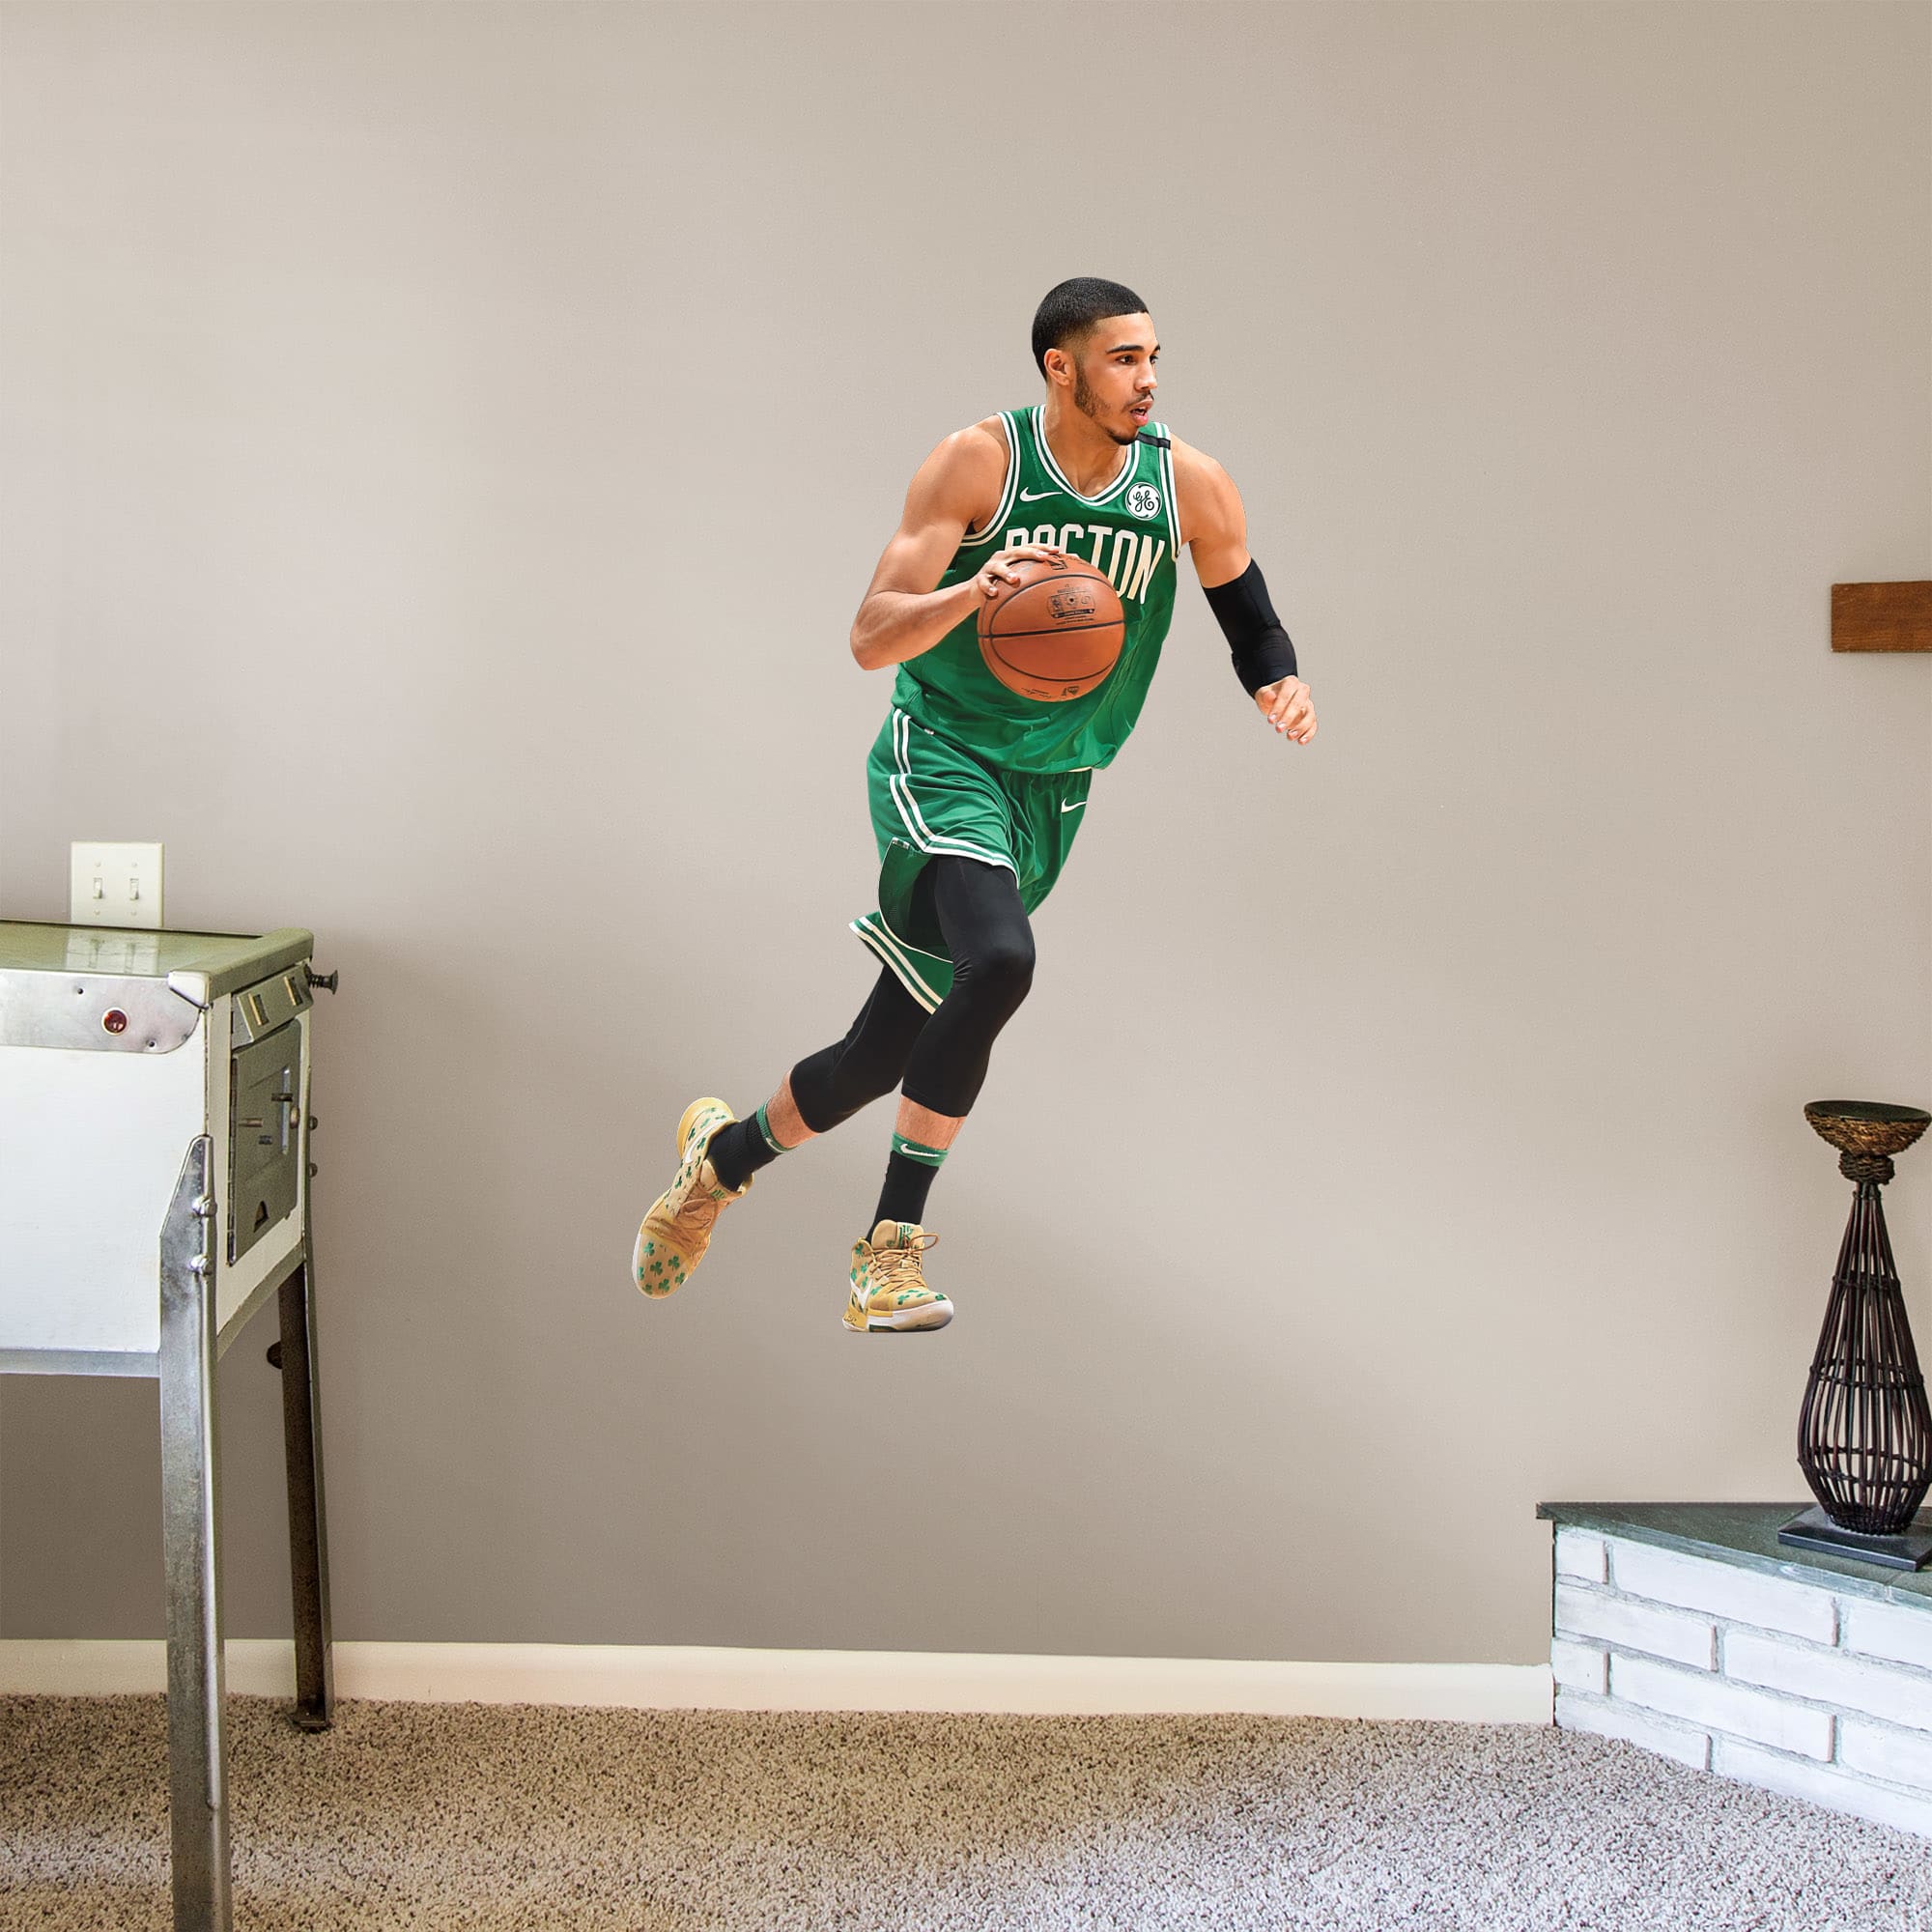 Jayson Tatum for Boston Celtics - Officially Licensed NBA Removable Wall Decal Giant Athlete + 2 Decals (32"W x 51"H) by Fathead